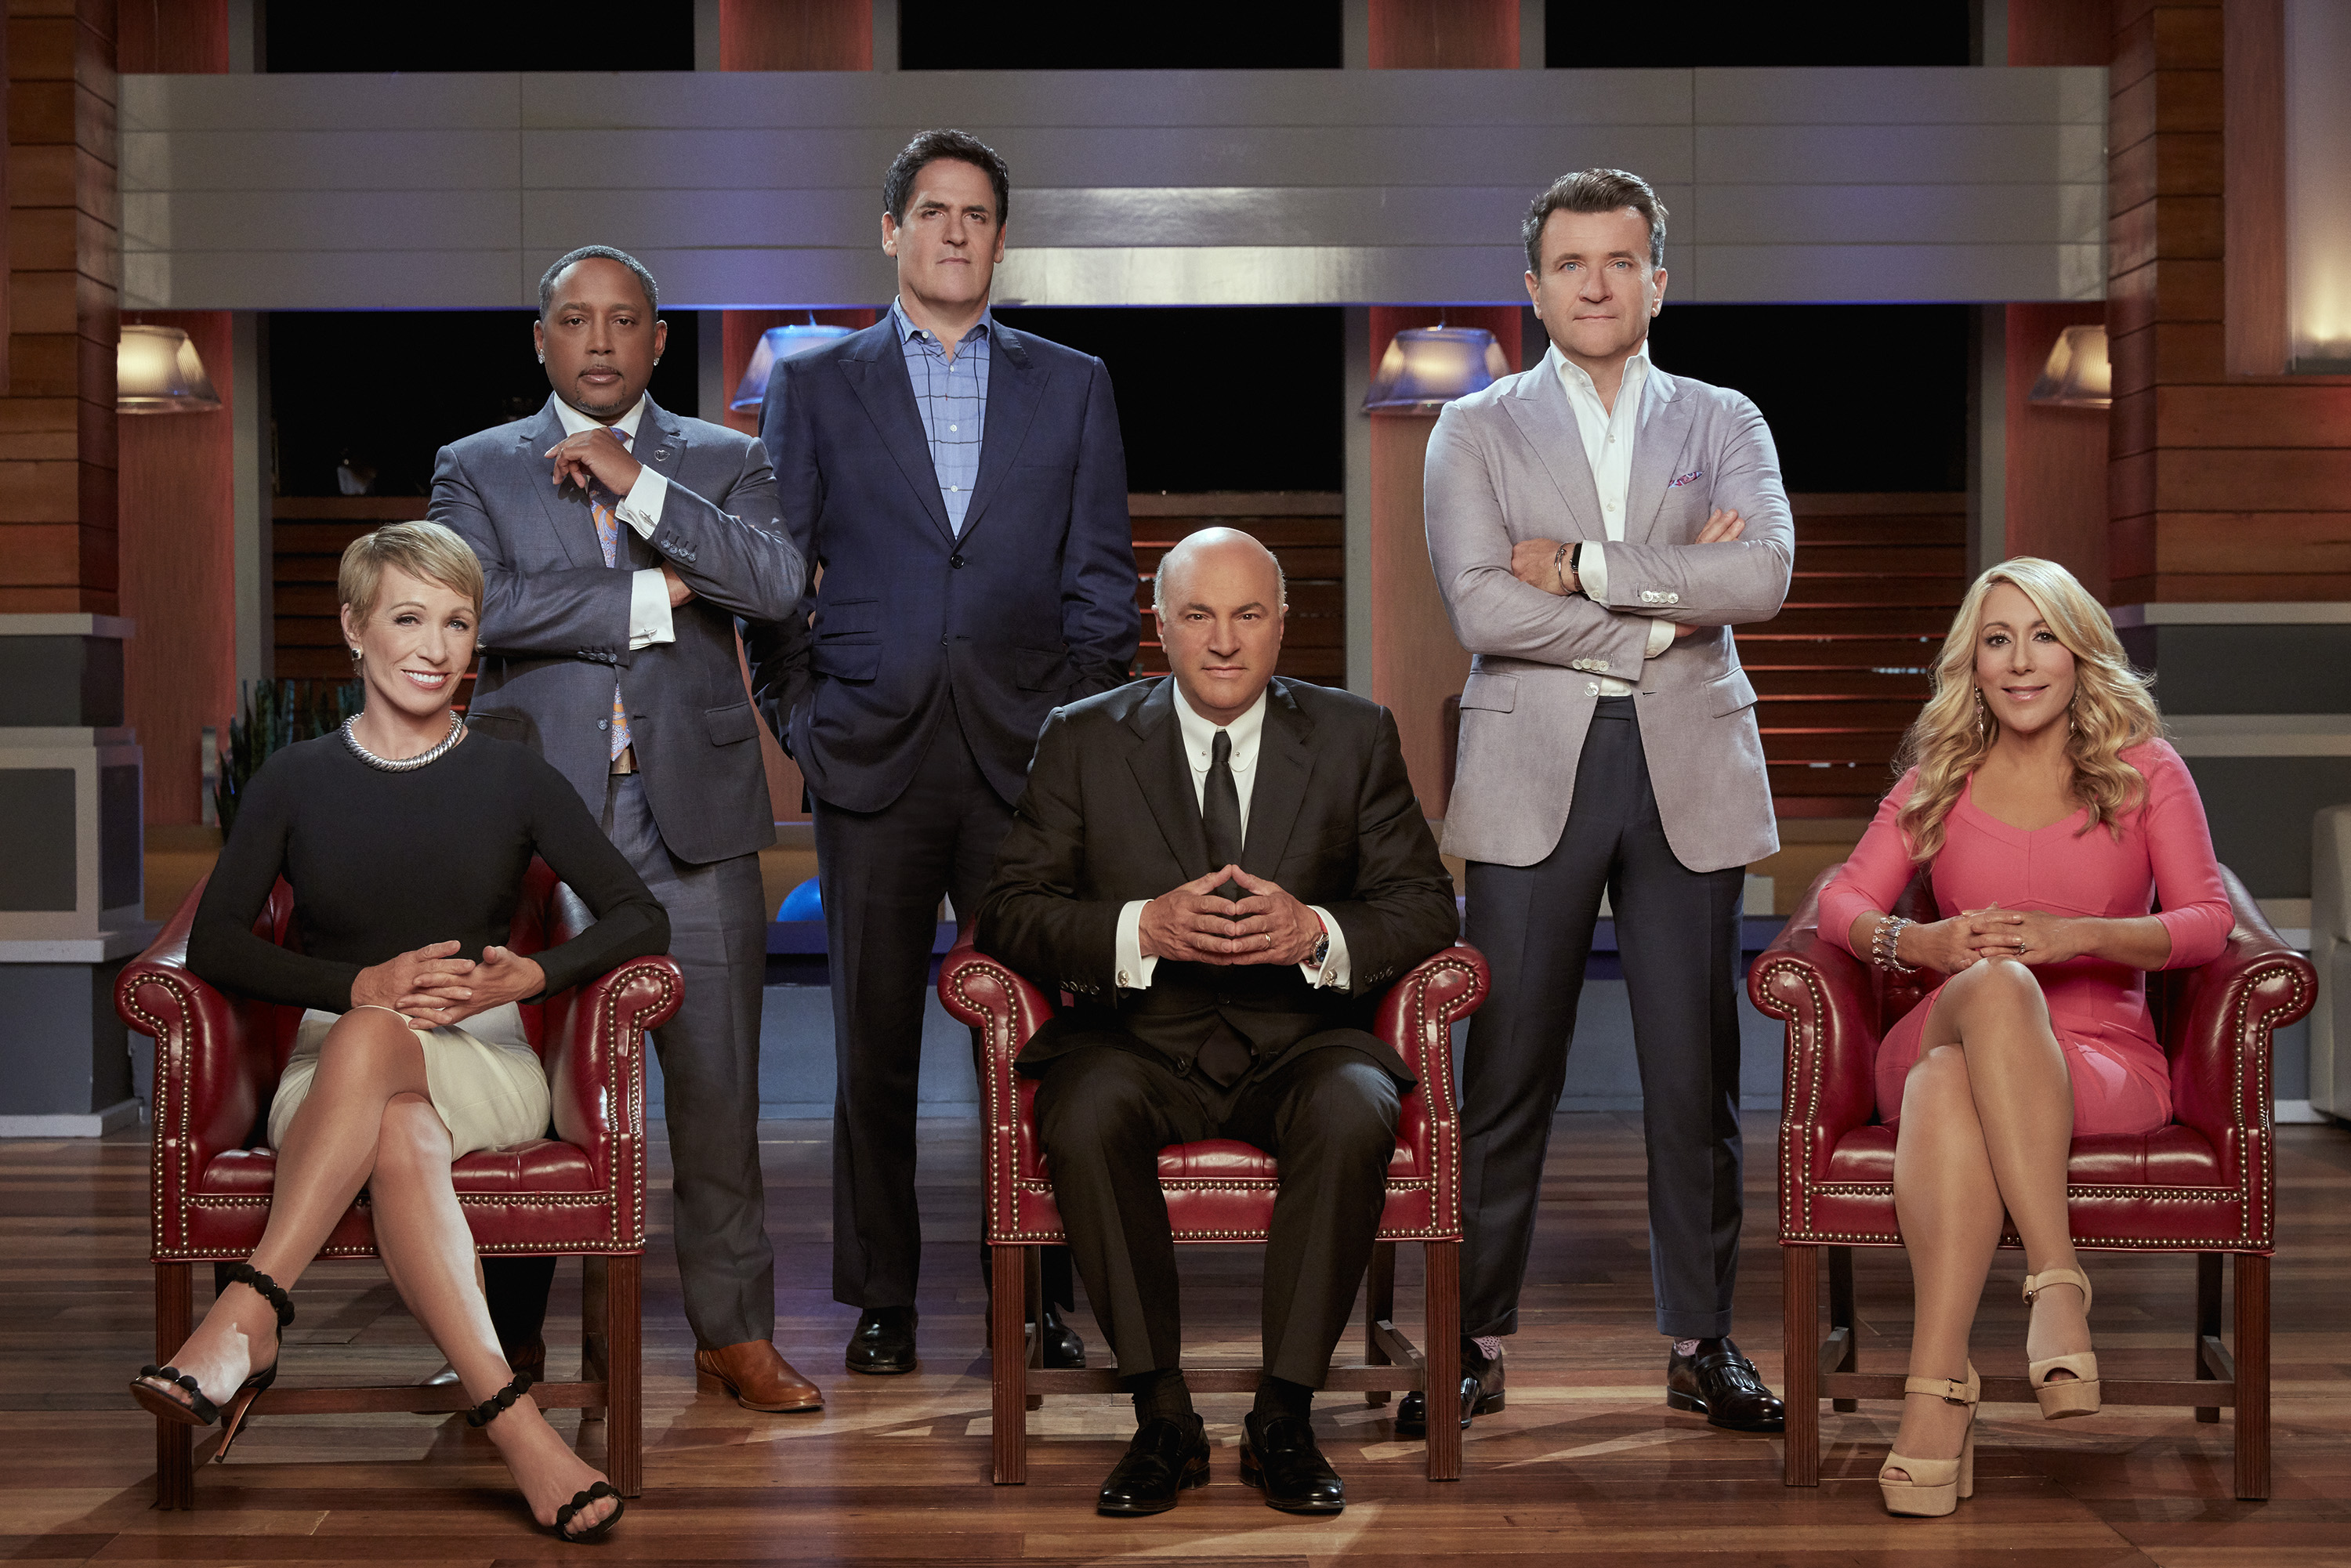 A Sponge Is 'Shark Tank''s Most Successful Product of All Time